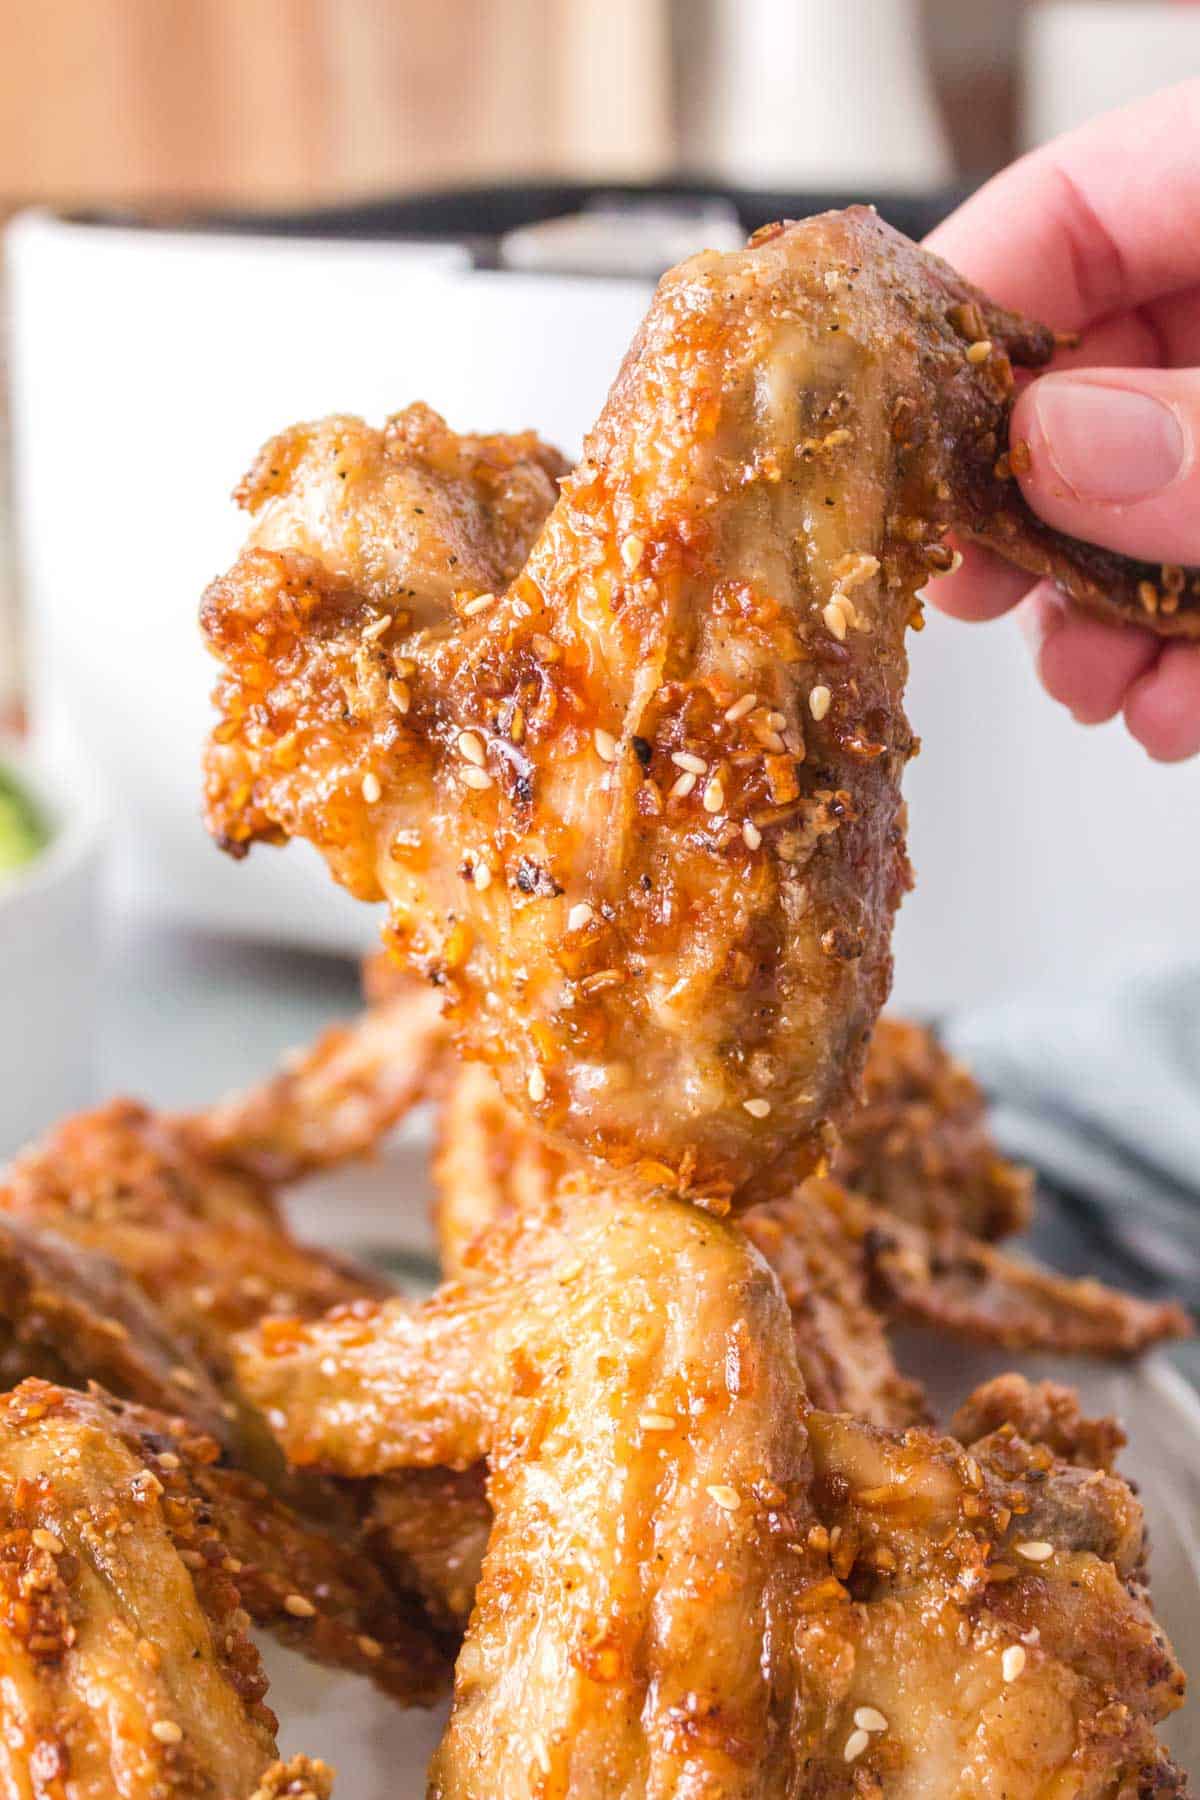 A hand lifting up a chicken wing from a plate of wings.